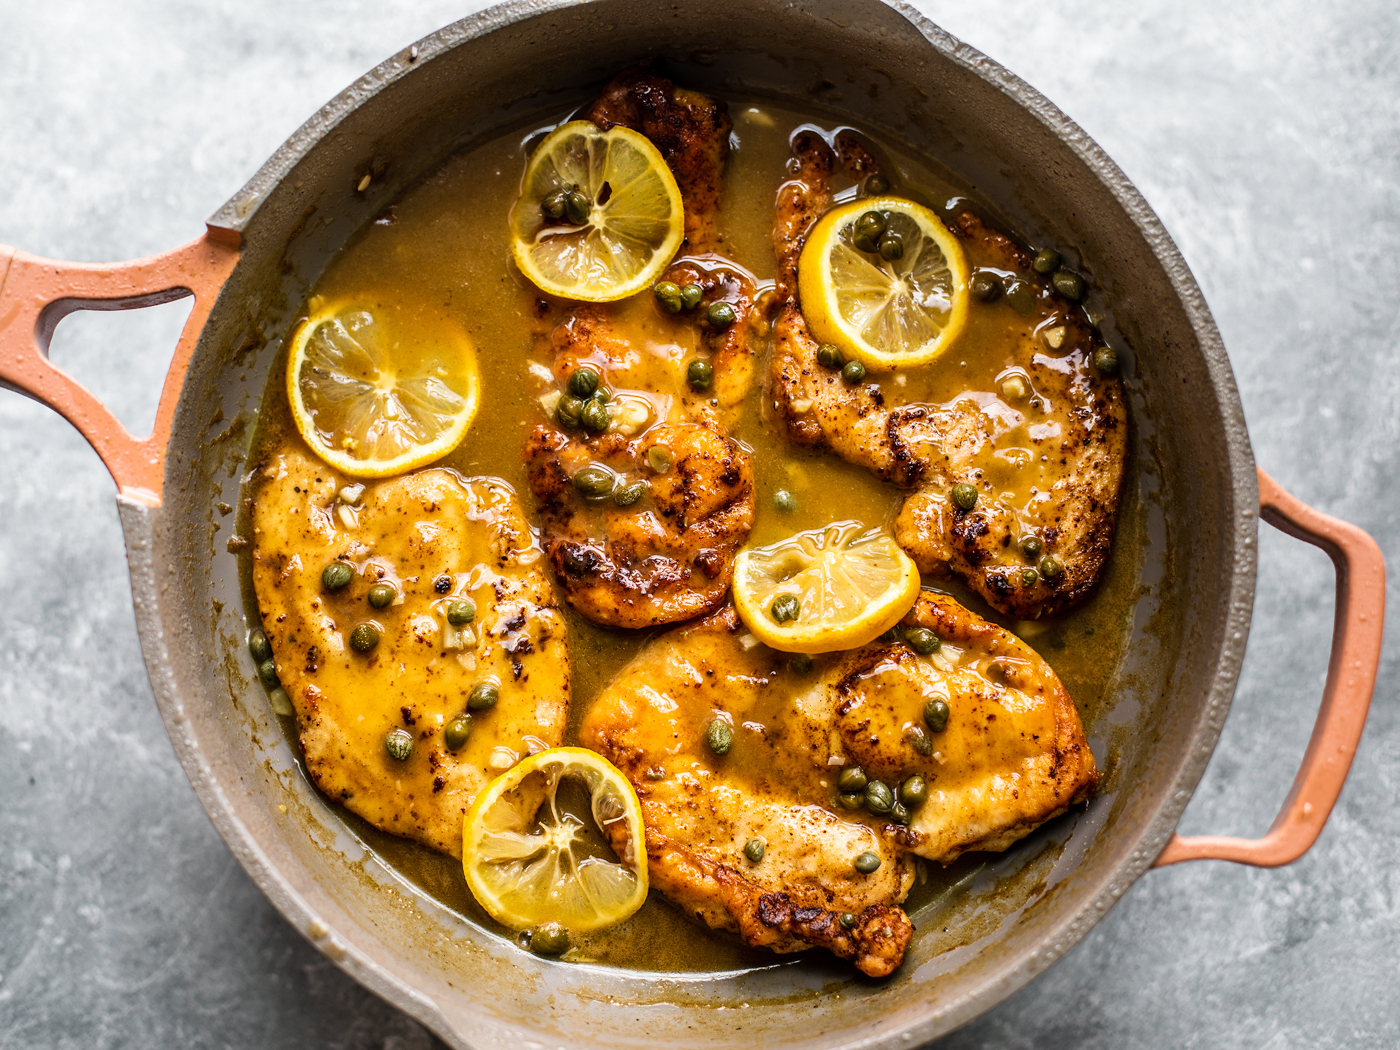 Golden chicken cutlets in skillet with sauce, capers, and lemon slices.